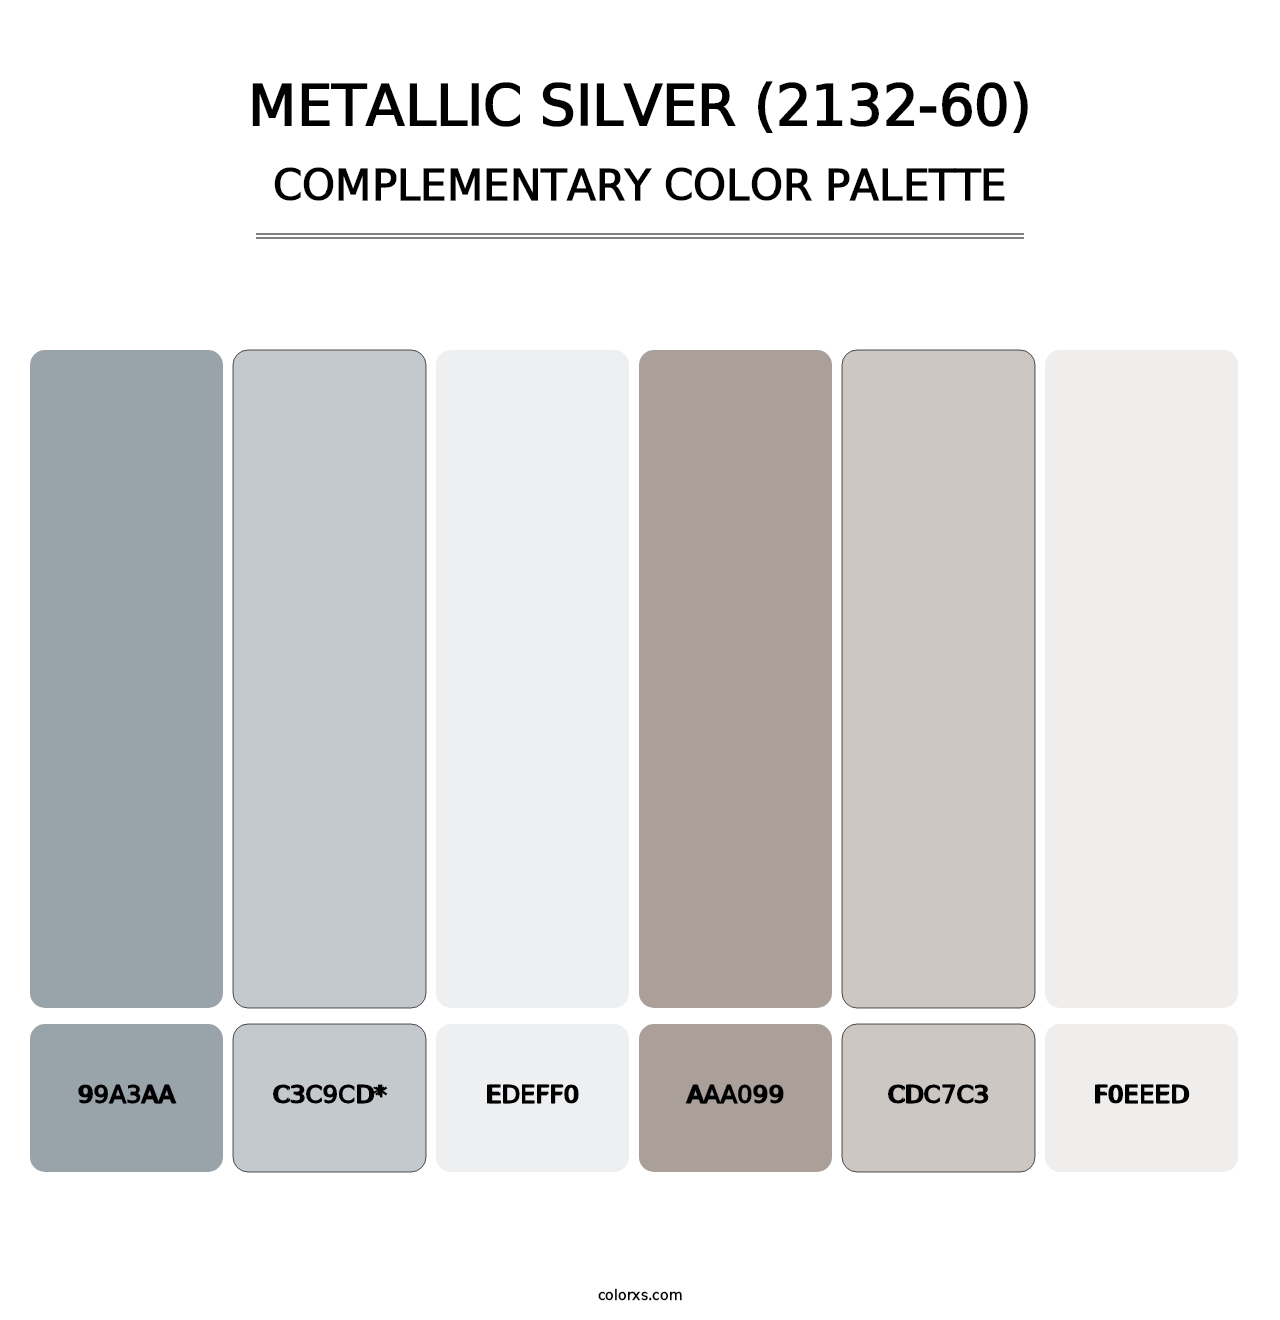 Metallic Silver (2132-60) - Complementary Color Palette